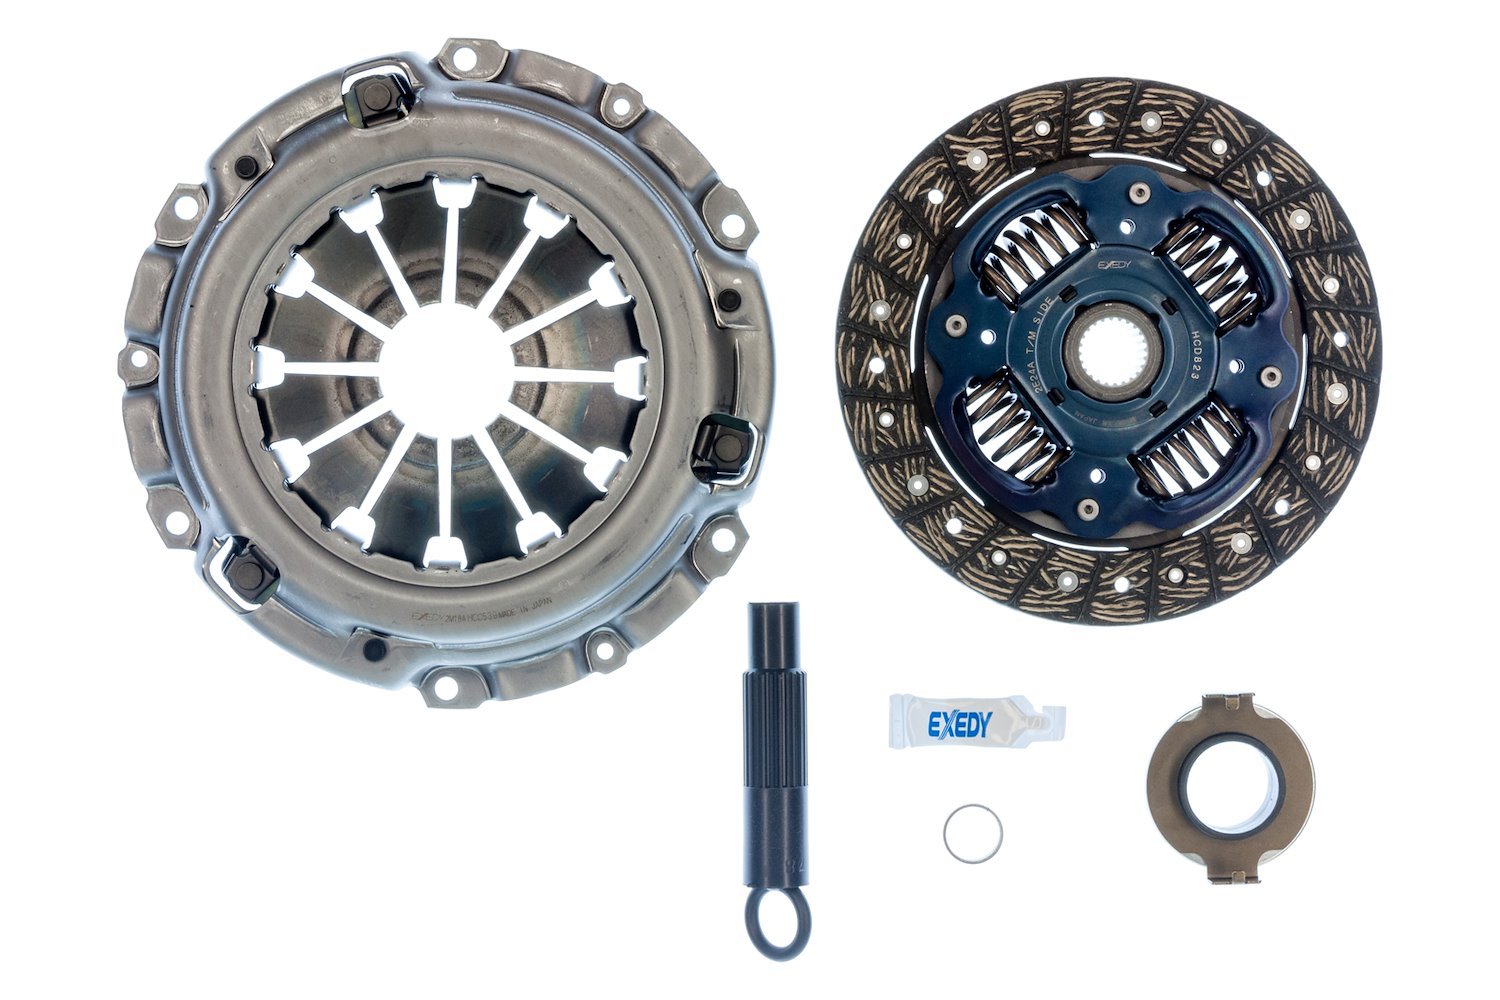 KHC10 OEM Replacement Transmission Clutch Kit, 2002-2006 Acura RSX L4